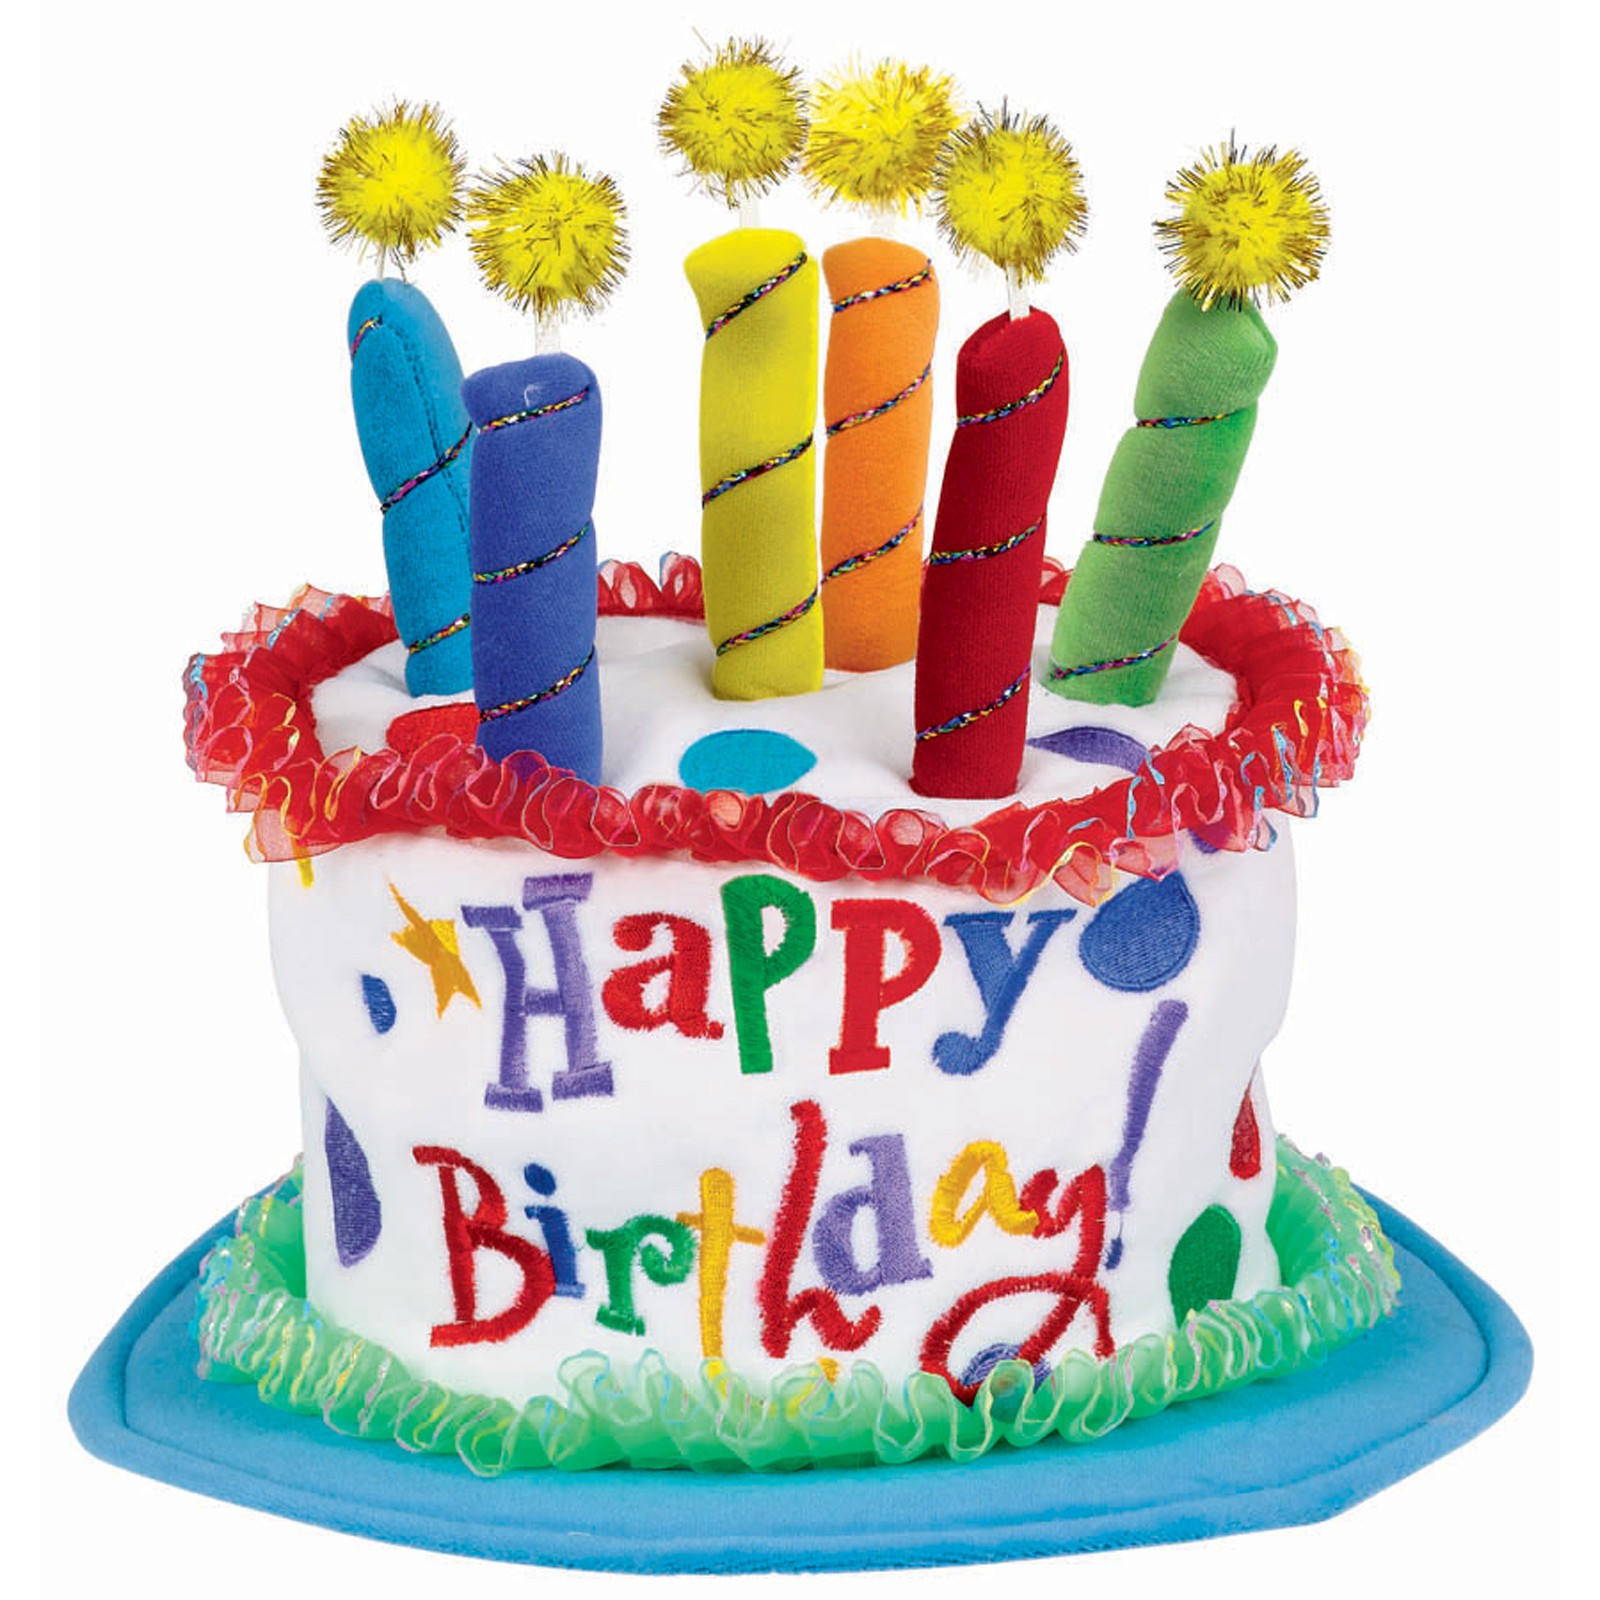 39 Birthday Cake Png Free Cliparts That You Can Download To You